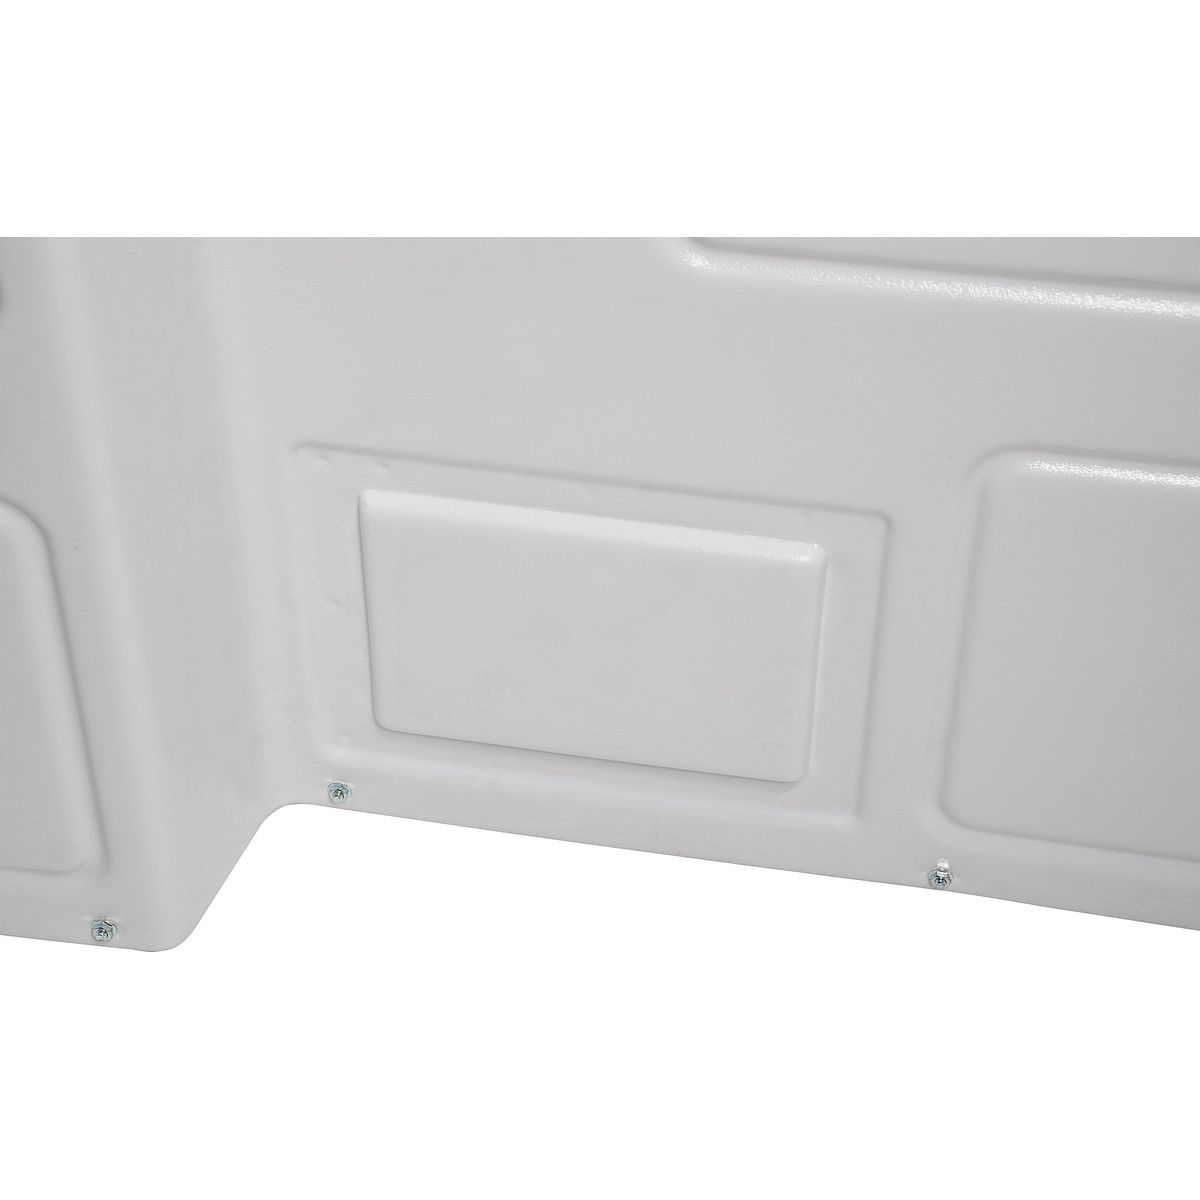 Weather Guard Composite Bulkhead Low Roof Ford Transit (96300-3-01)